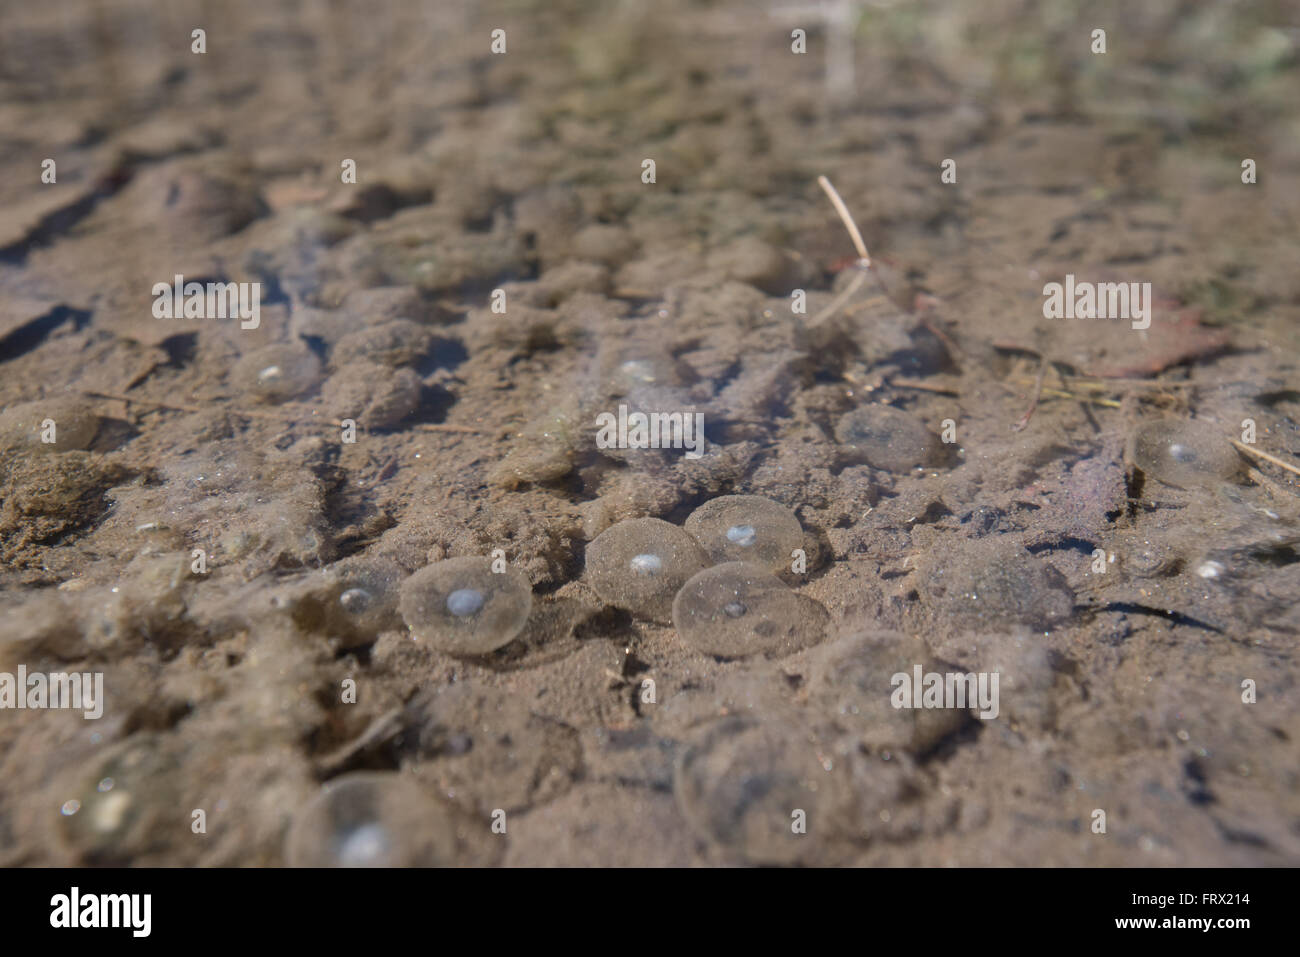 Frog eggs below the surface of muddy puddle just before tadpoles hatch in early spring Stock Photo